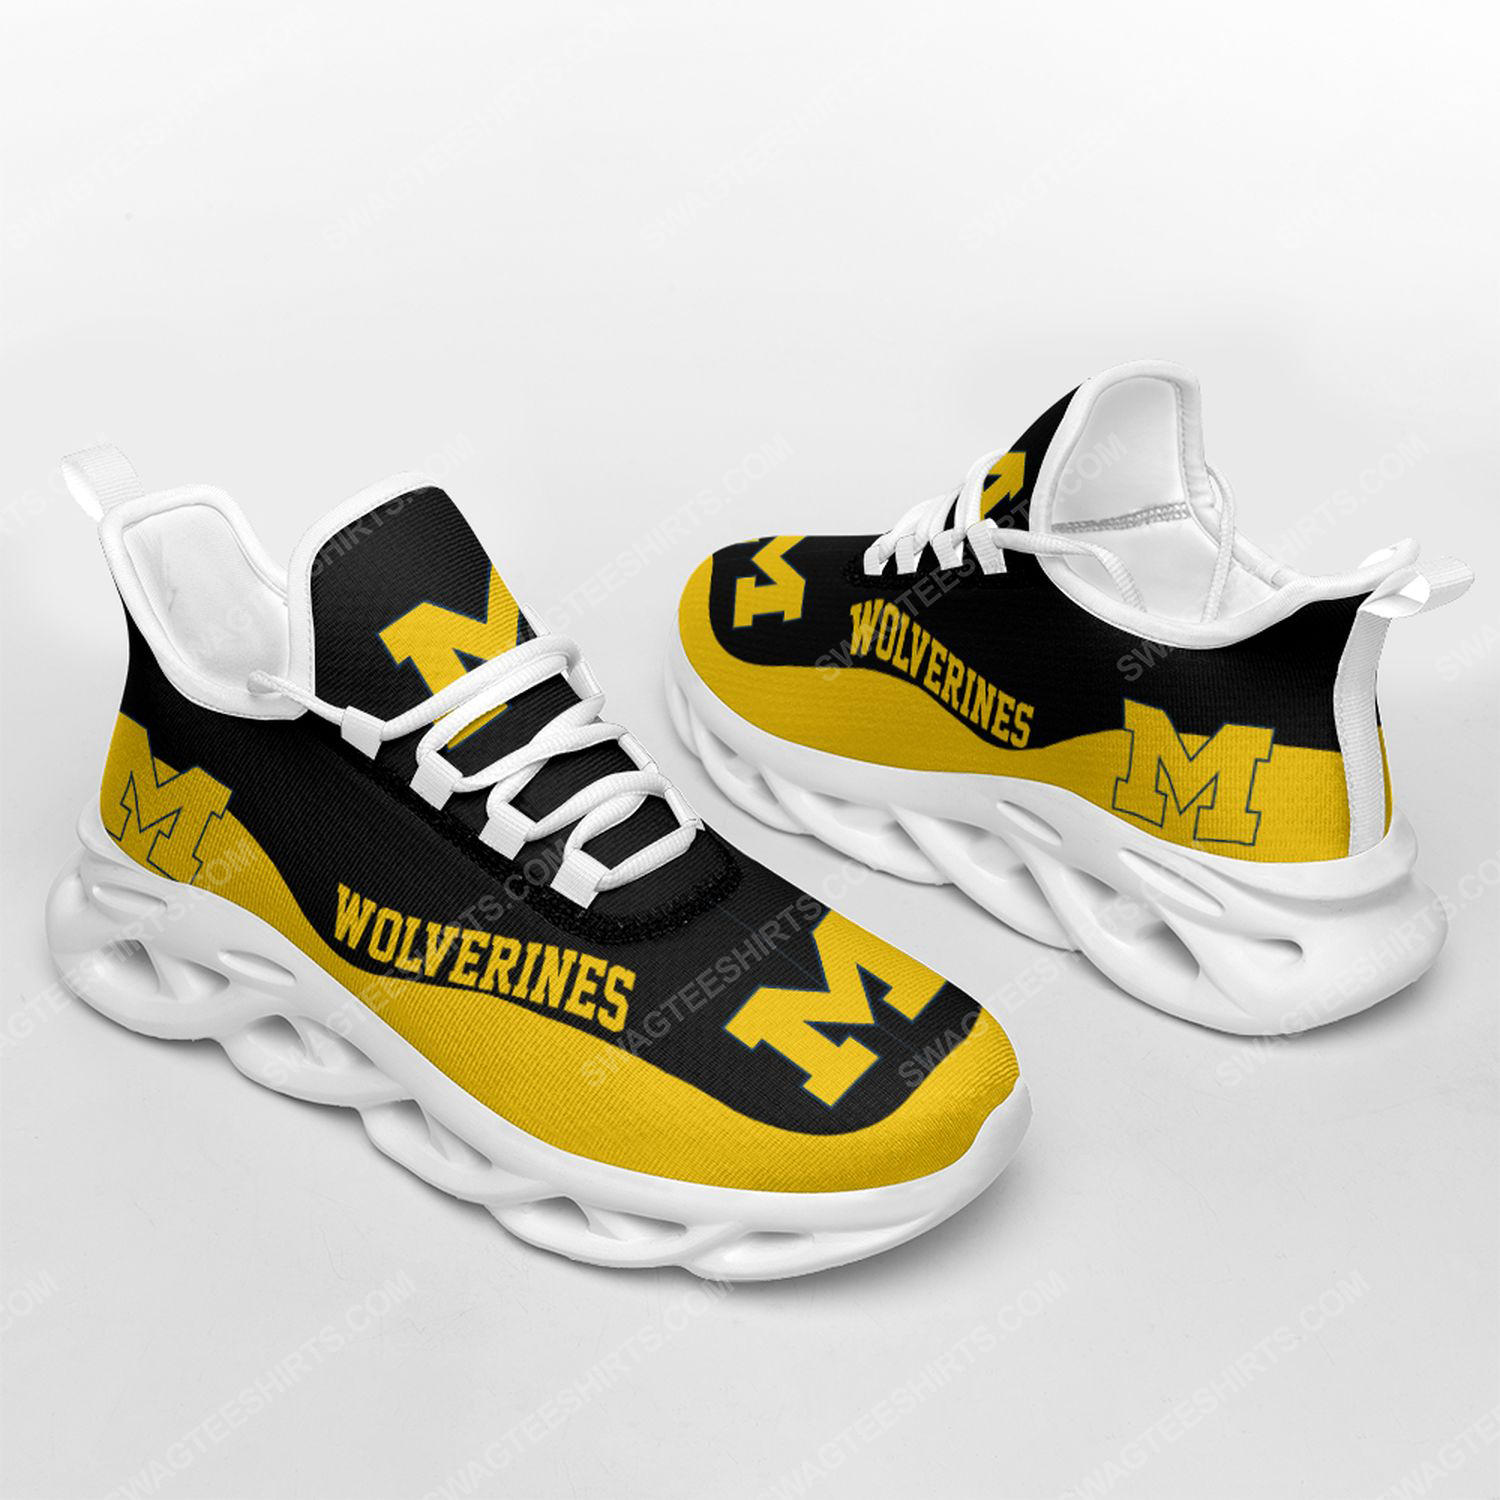 The michigan wolverines football team max soul shoes 2